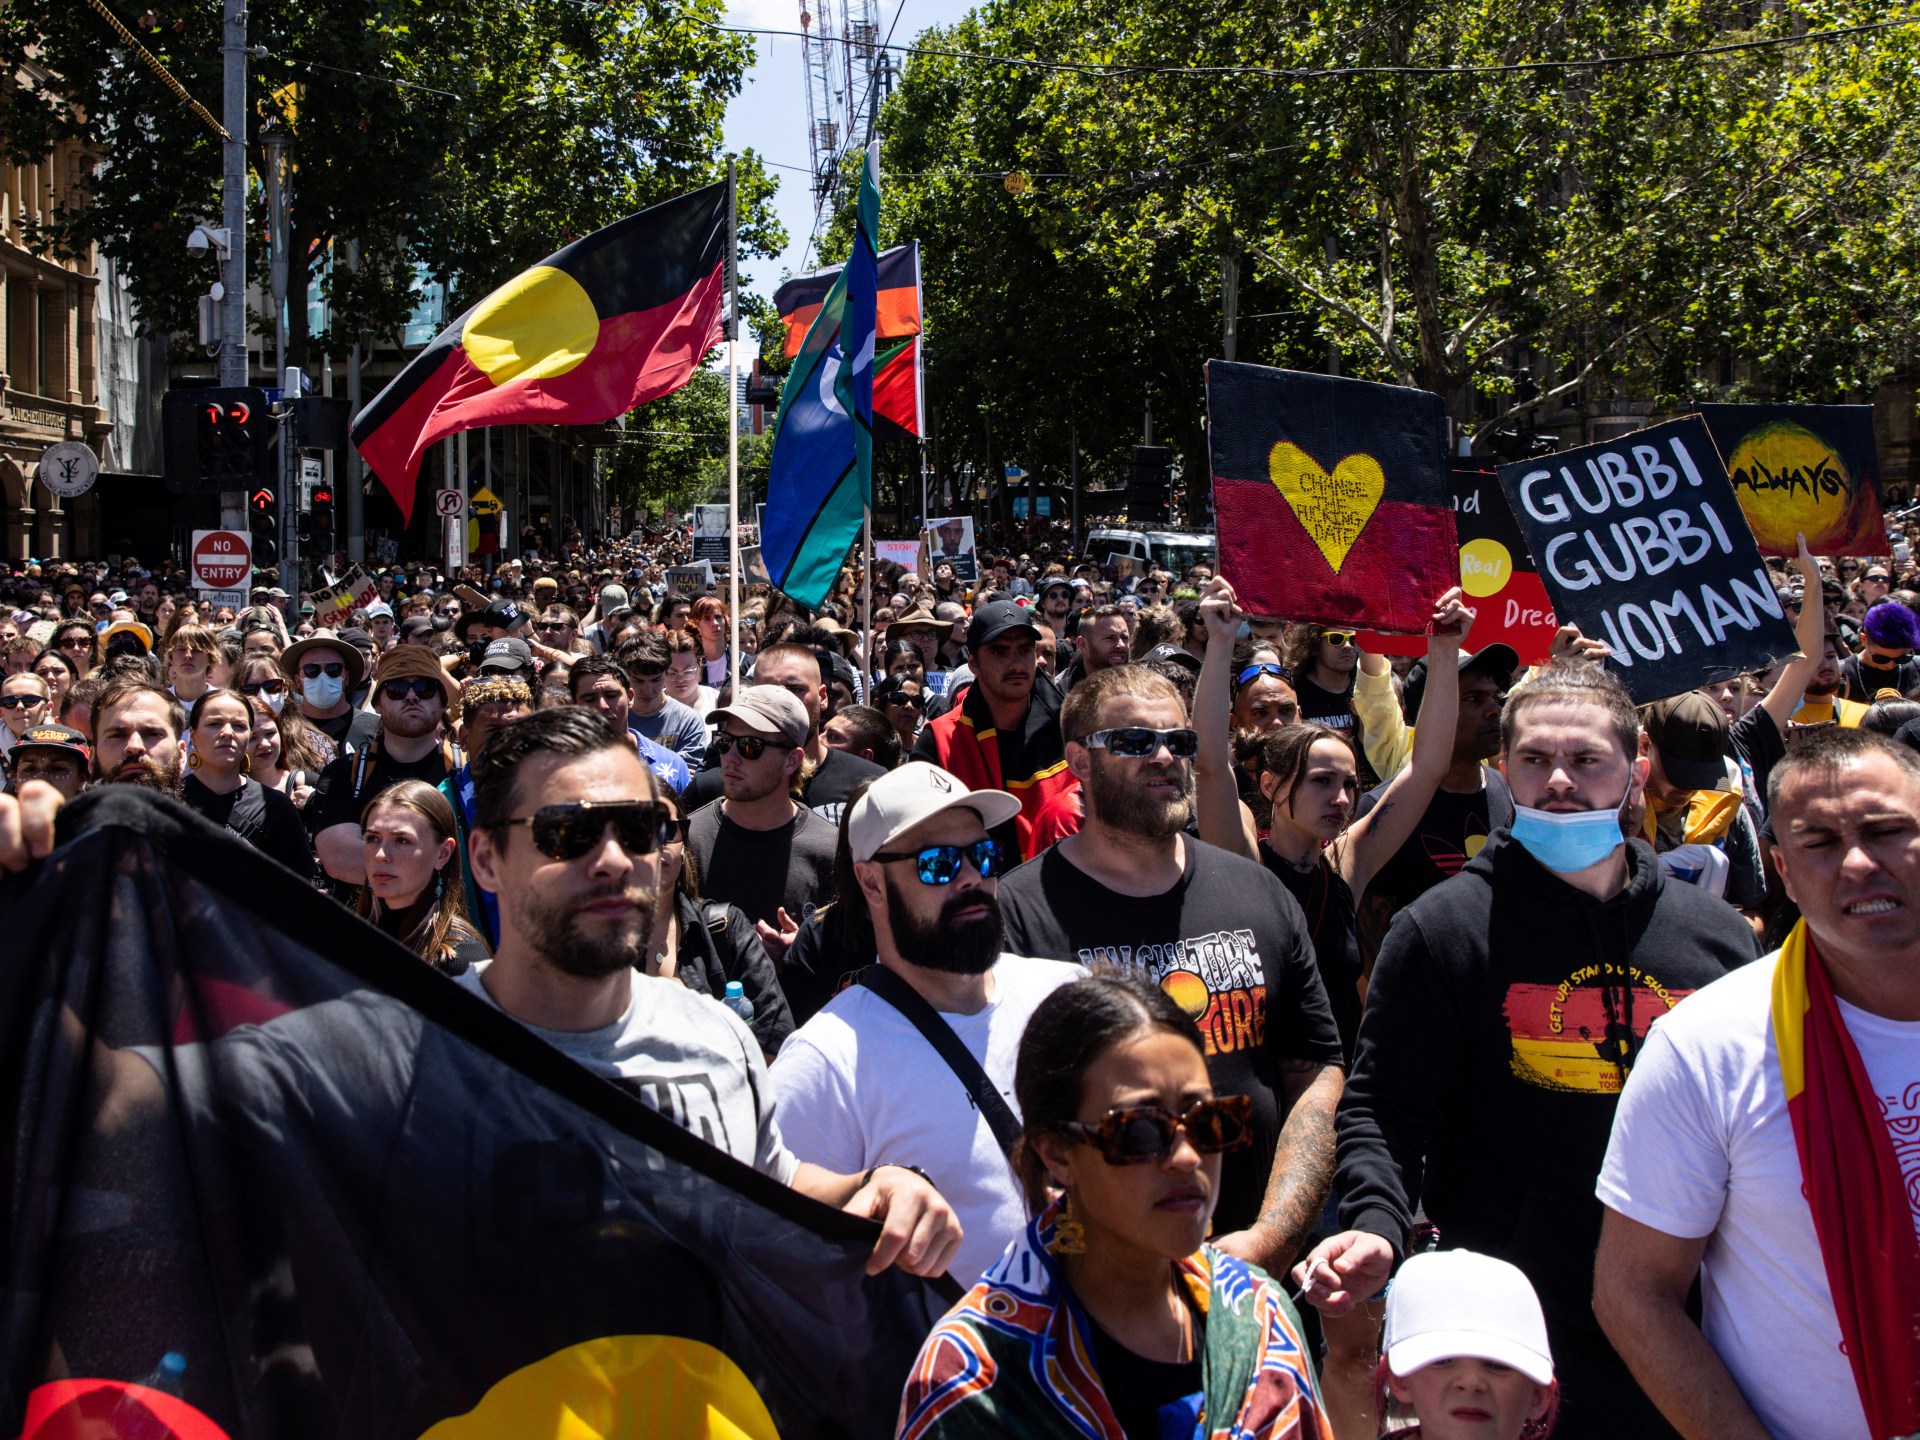 Thousands protest ‘invasion’ as Australia marks national day